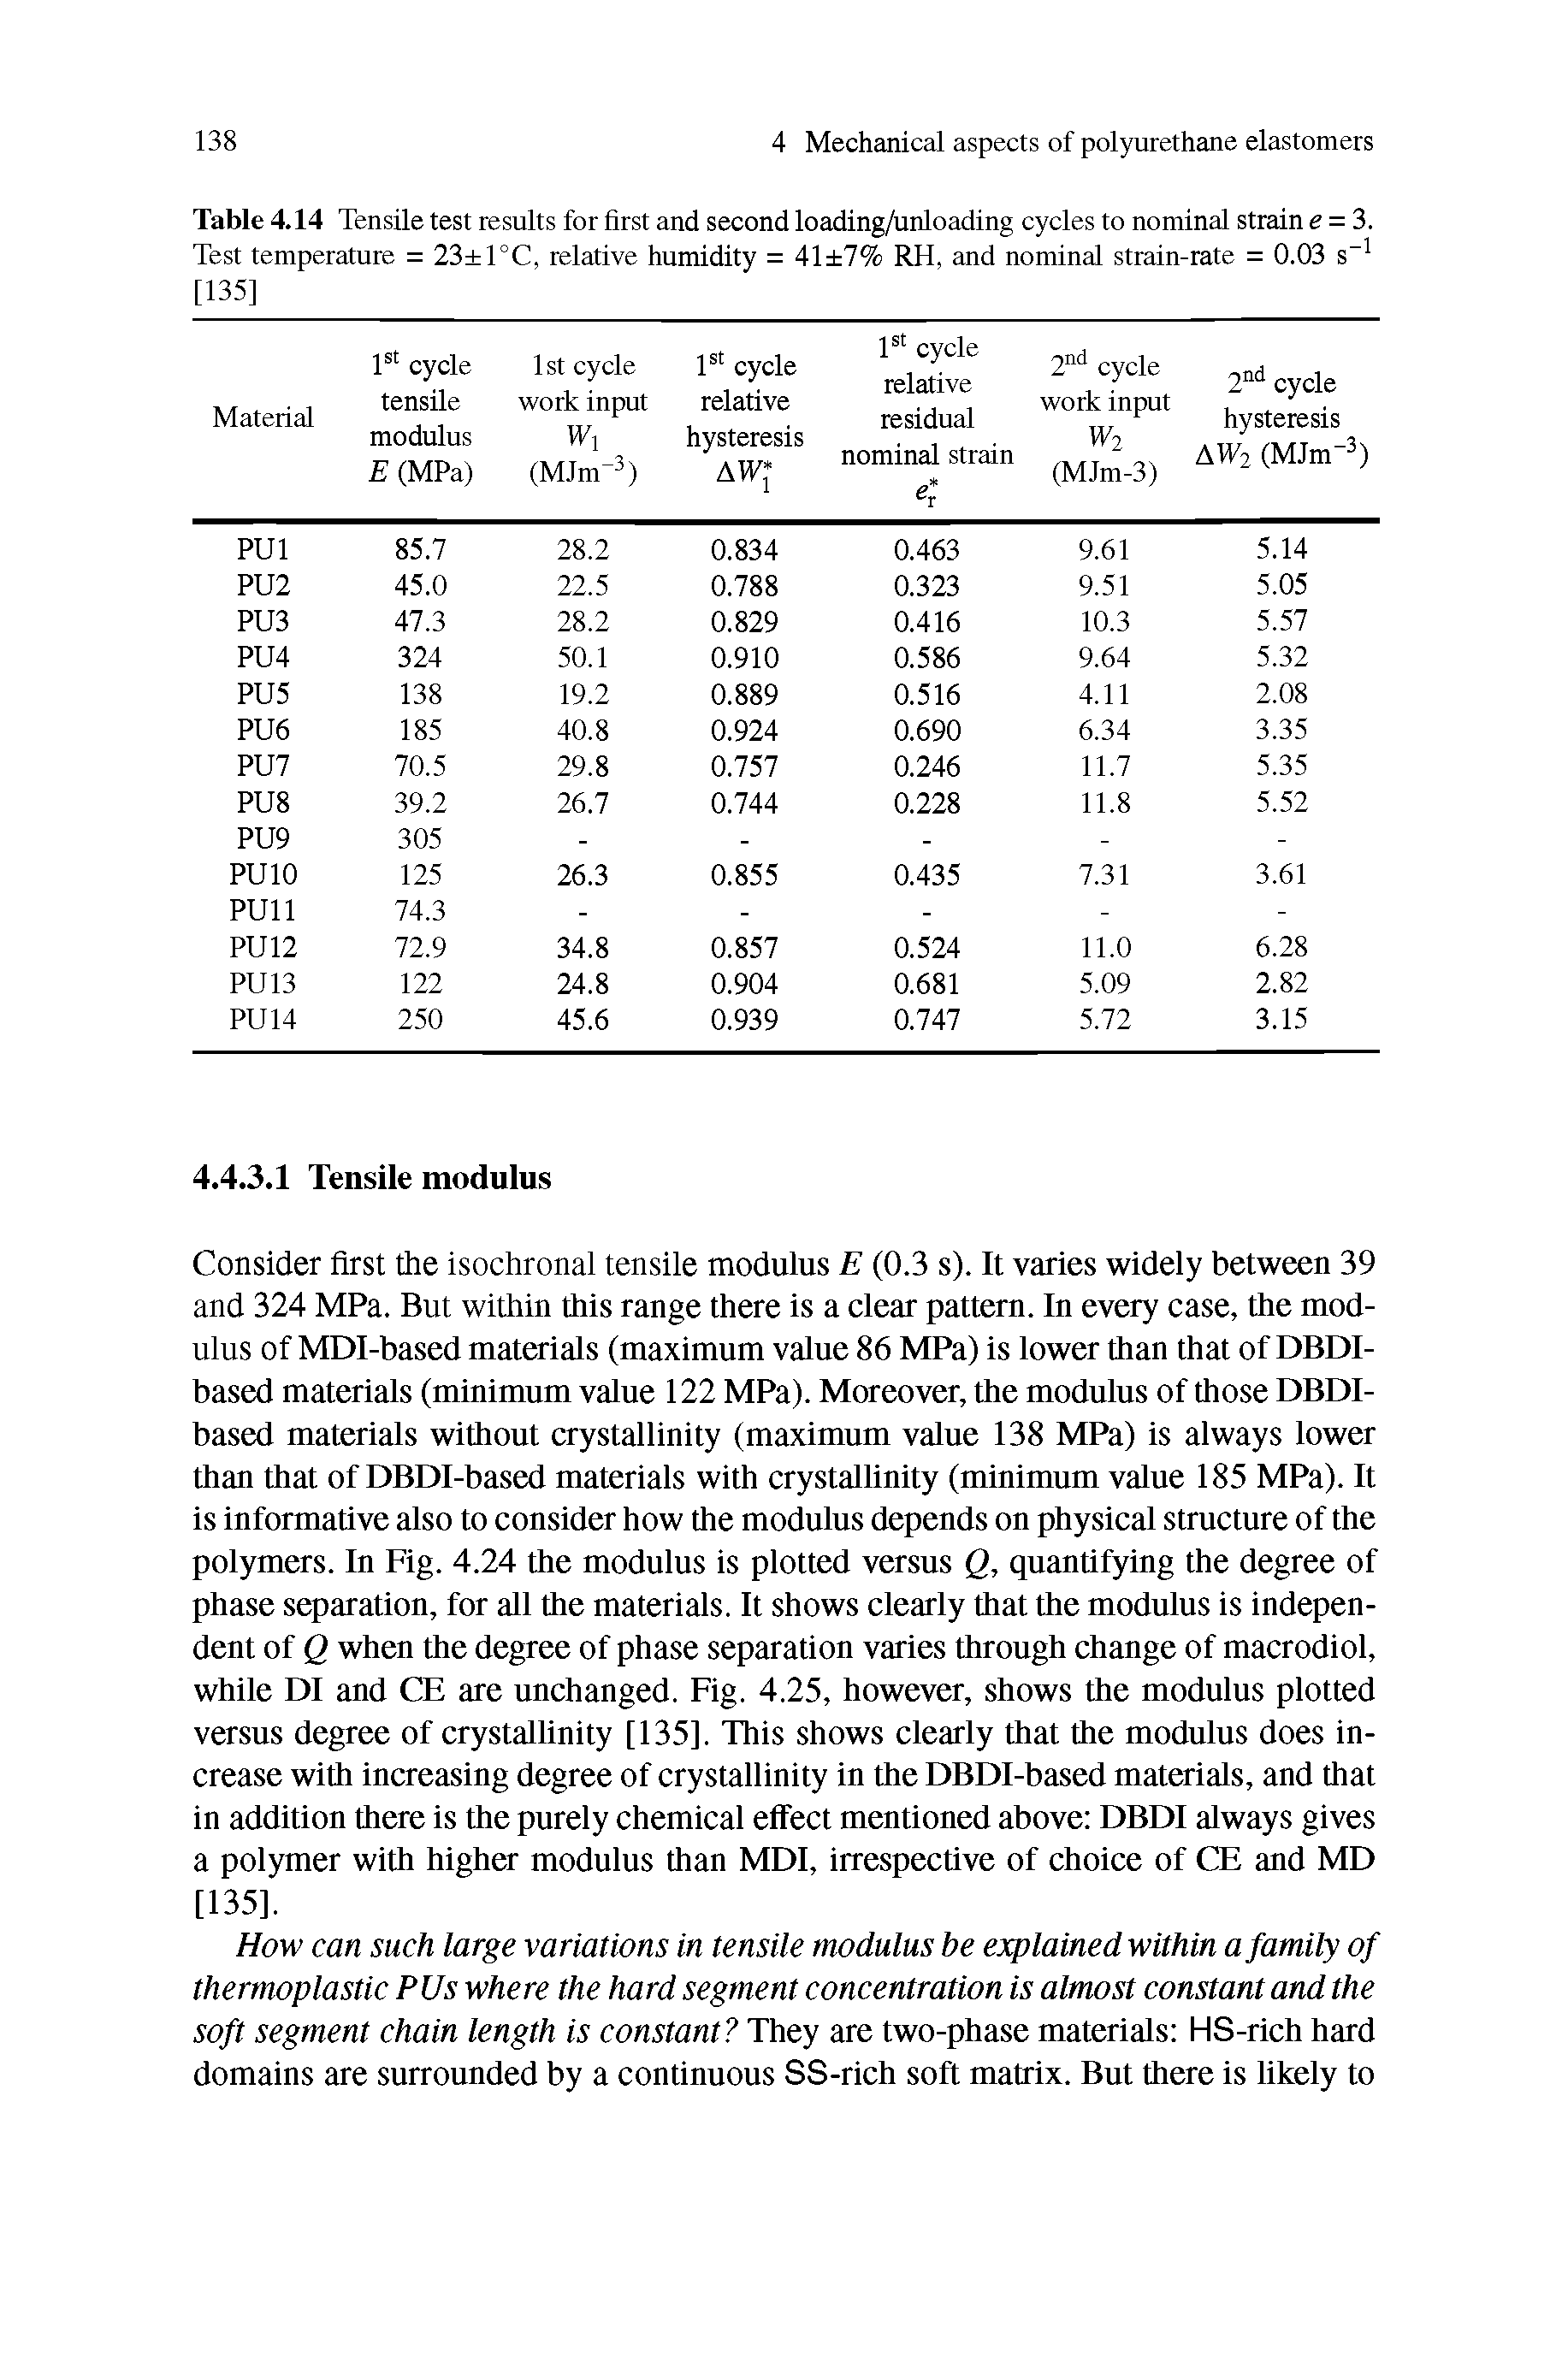 Table 4.14 Tensile test results for first and second loading/unloading cycles to nominal strain e = 3. Test temperature = 23 1°C, relative humidity = 41 7% RH, and nominal strain-rate = 0.03 s [135]...